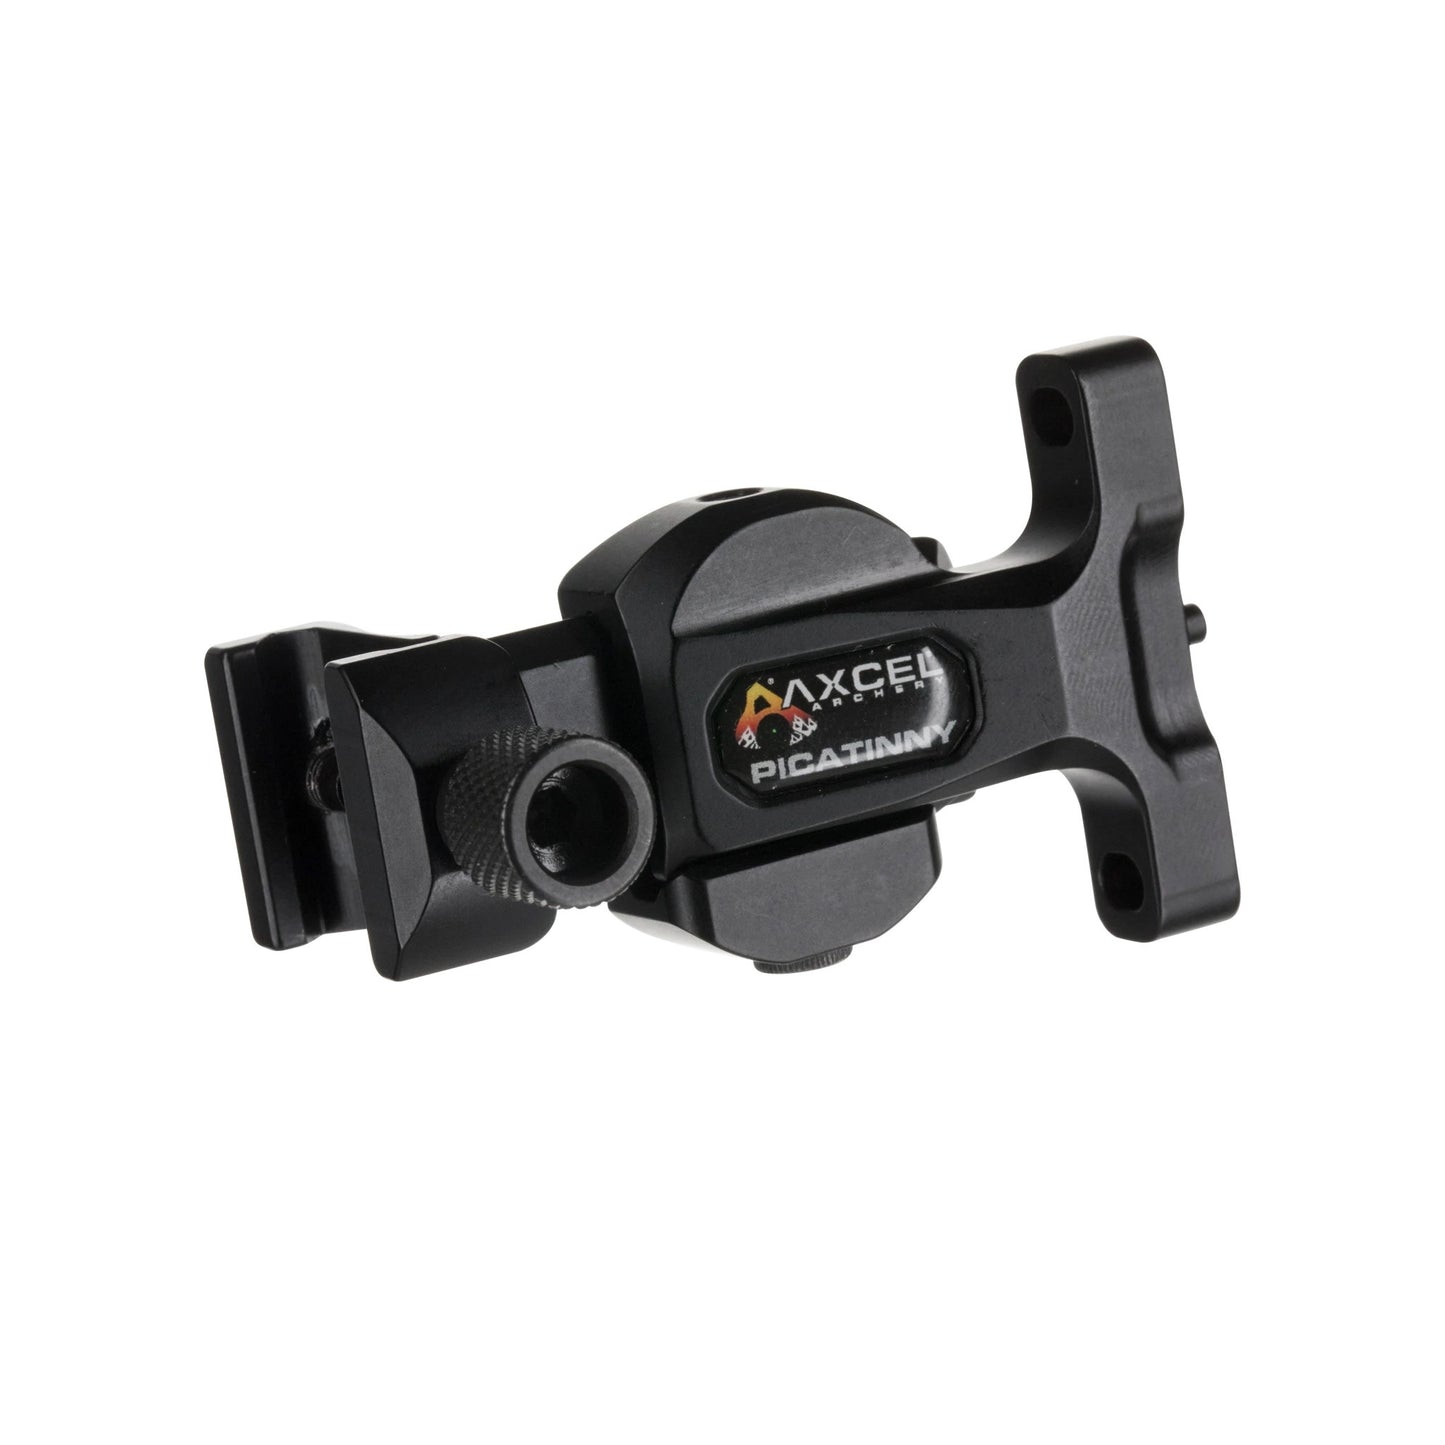 Axcel AccuHunter/AccuTouch Slider Sight - Picatinny Mount Conversion Kit - Black